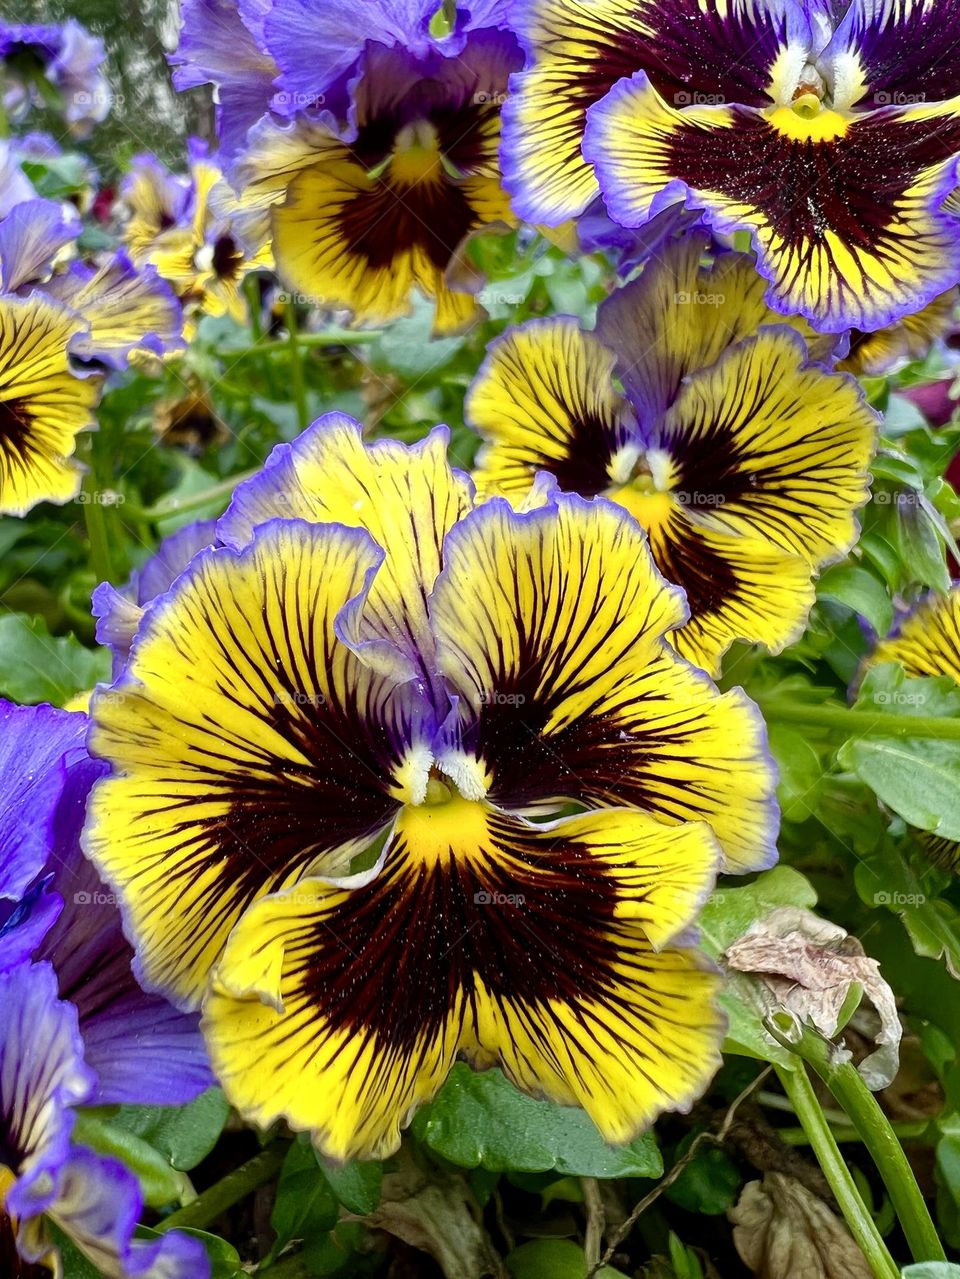 Bright pansies looking great as winter becomes spring. A closeup of yellow and purple brilliance!